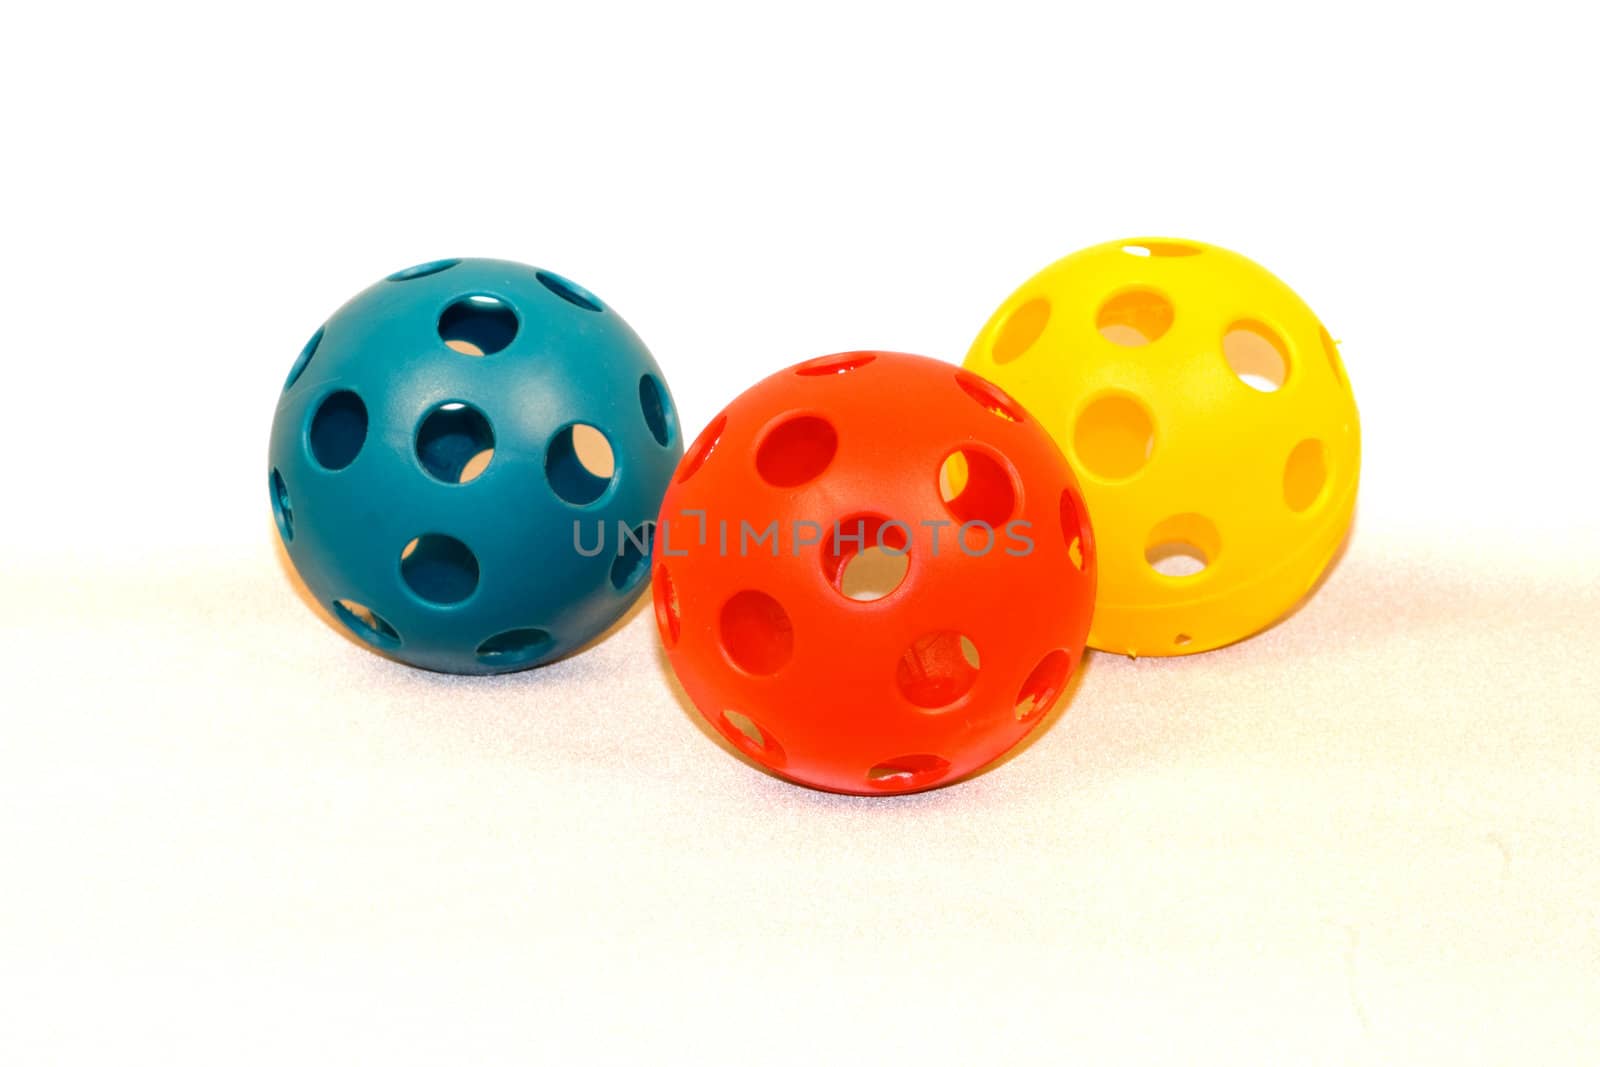 Plastic Toy Baseballs isolated in a white background with blue, yellow and red colored style practice balls for a child.
